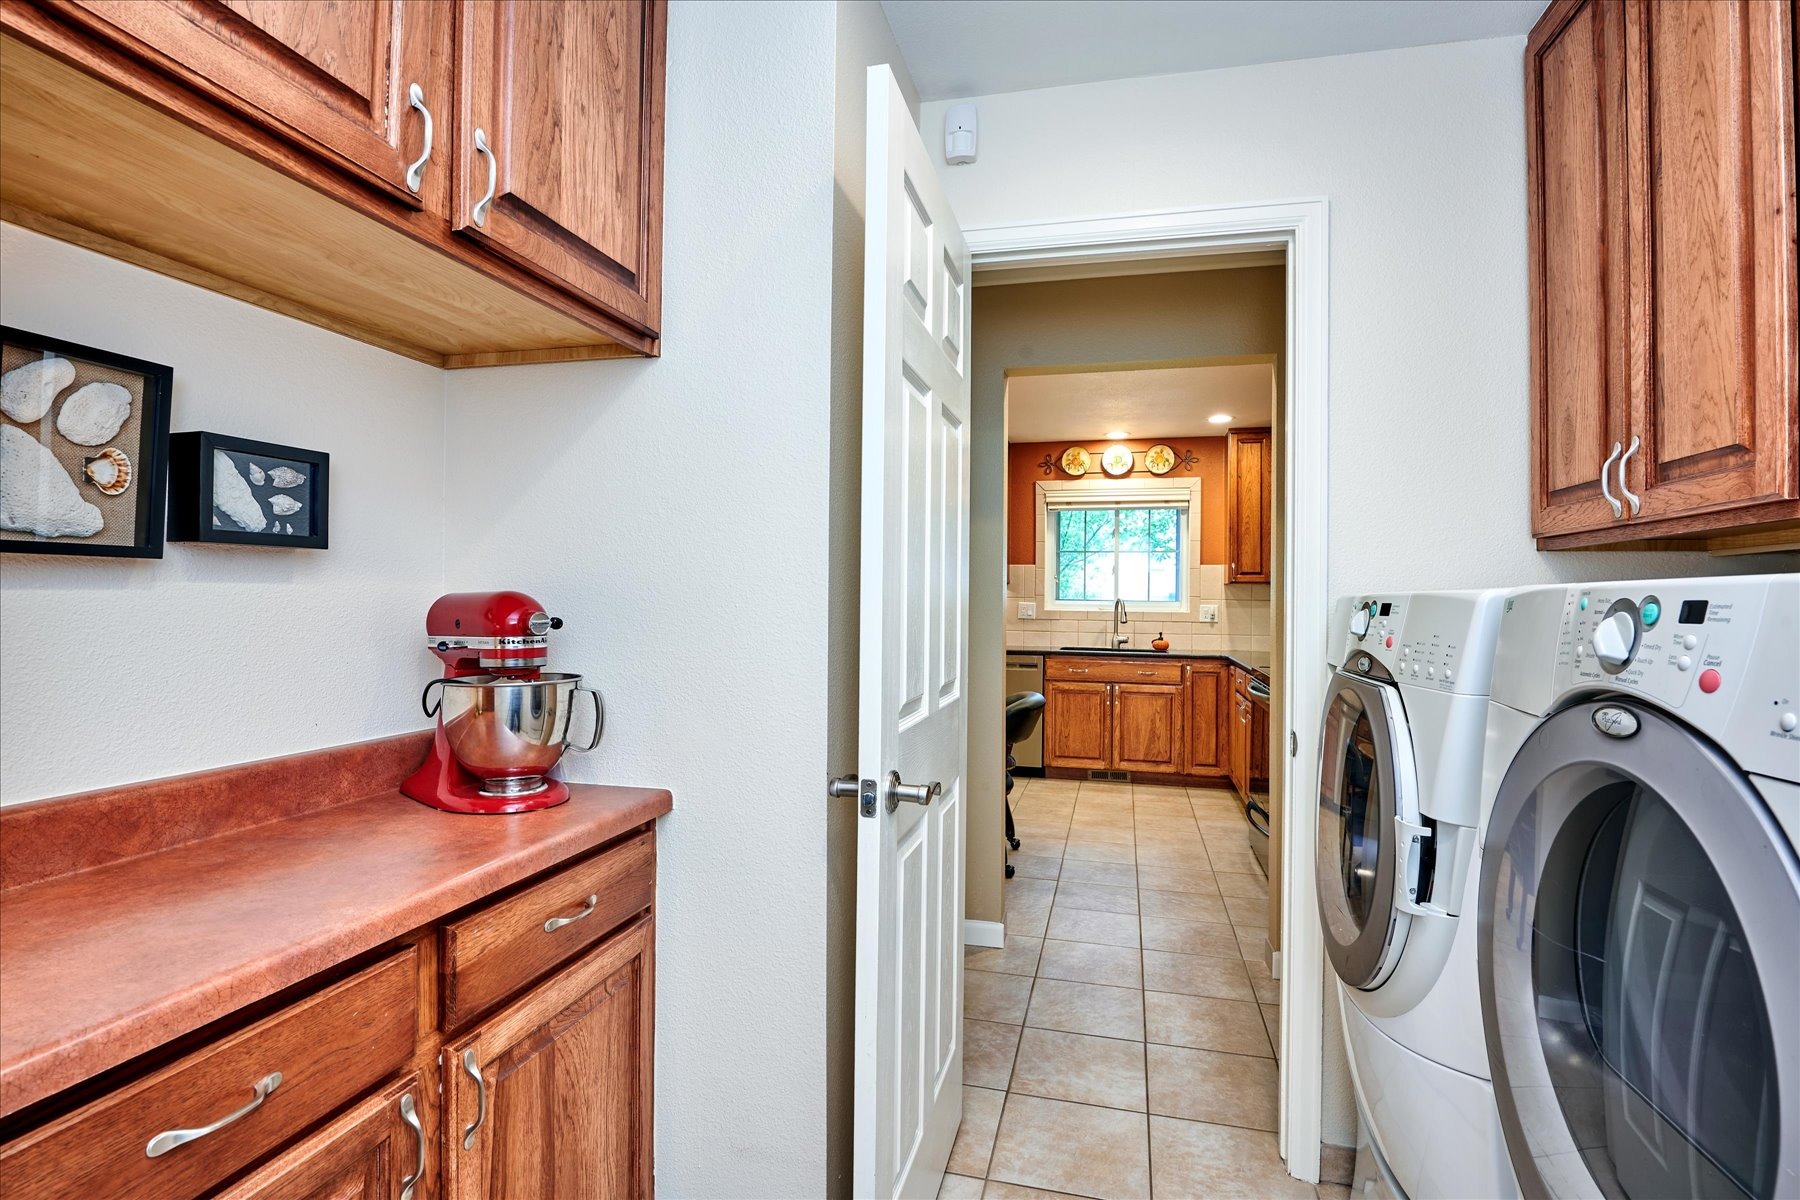 Great Storage Cabinetry in Laundry Room